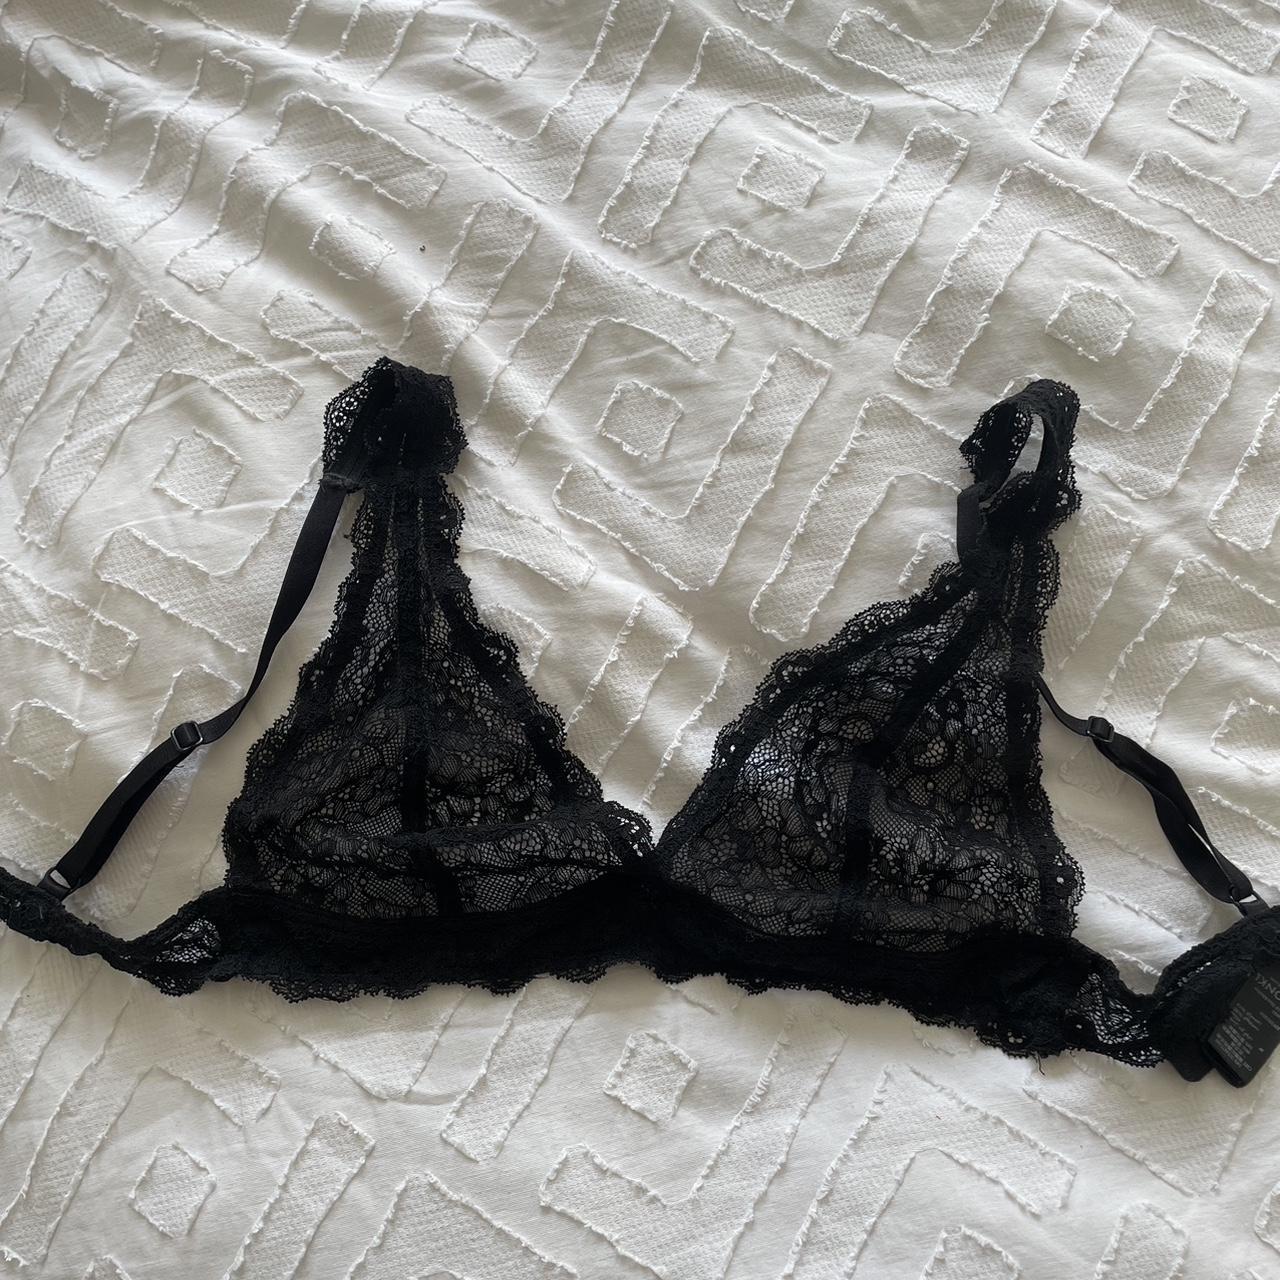 Black lace bralette, Size small, Worn but such good